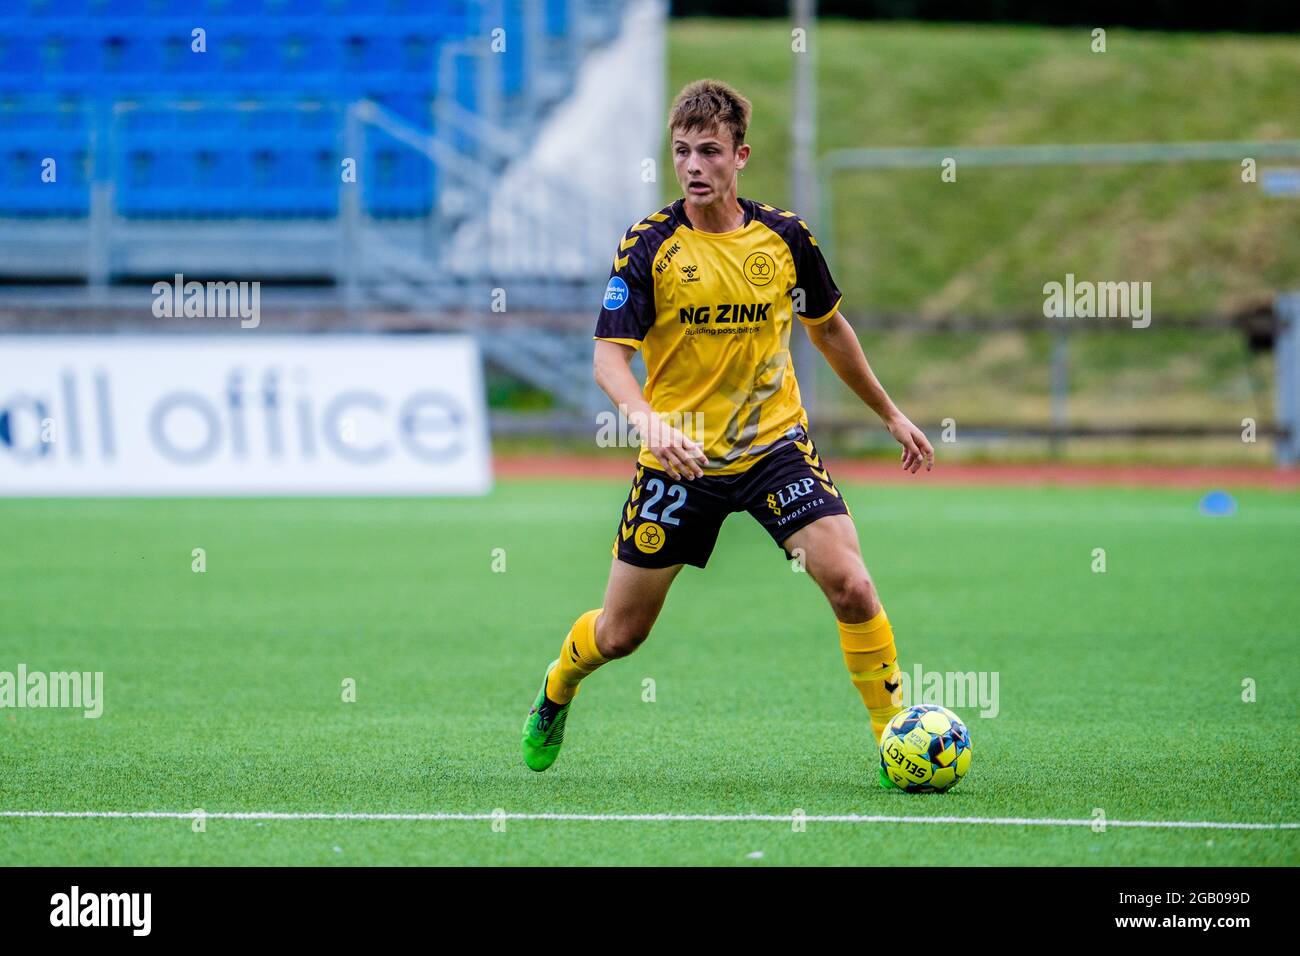 Copenhagen, Denmark. 31st, 2021. Tobias Stagaard (22) of AC Horsens seen during the NordicBet match between Fremad Amager and AC Horsens at Sundby Idraetspark in Copenhagen. (Photo credit: Gonzales Photo -